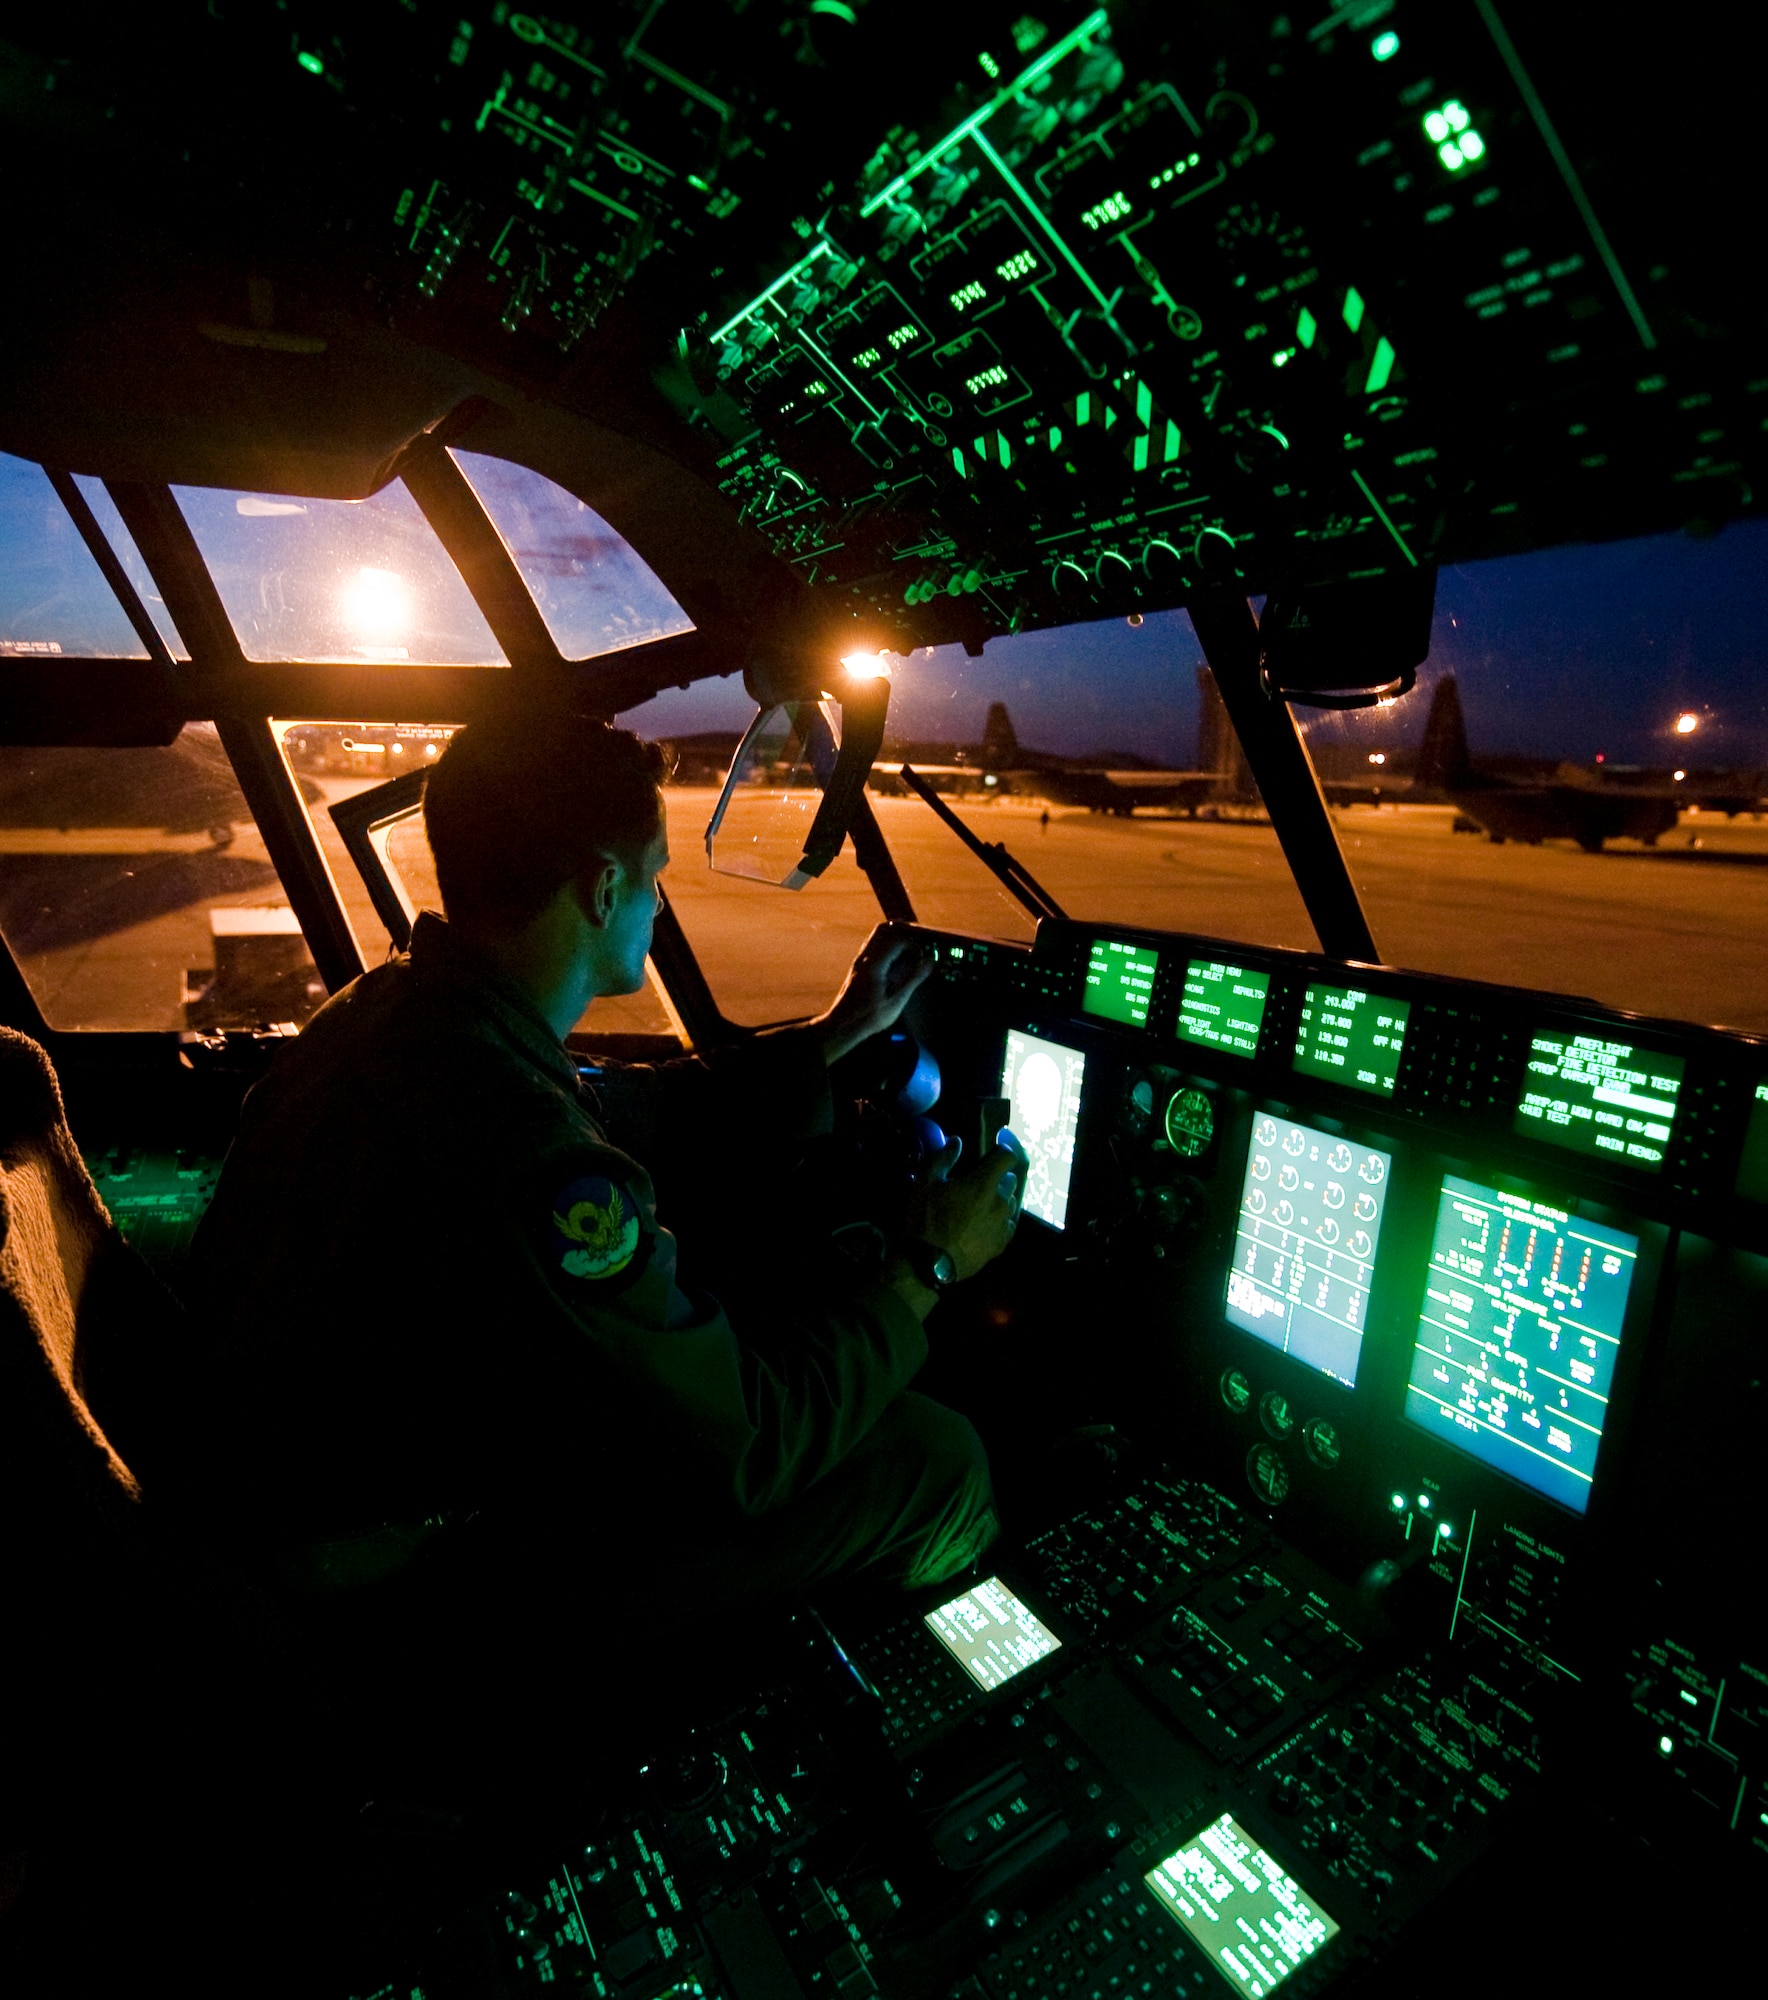 U.S. Air Force Capt. Jonathan Ferricher, 39th Airlift Squadron, prepares a C-130J for flight June 4, 2013, at Dyess Air Force Base, Texas. The Denton Amendment allows the U.S. military aircraft to transport, on a space-available basis, humanitarian supplies from non-government organizations to people around the world who are in need of assistance.  The 317th Airlift Group transported the supplies to Pope Army Airfield, N.C., where it will be taken to Joint Base Charleston Air Base, S.C., and then to Afghanistan. The supplies were donated by Global Samaritan Resources.  (U.S. Air Force photo by Senior Airman Jonathan Stefanko/Released)